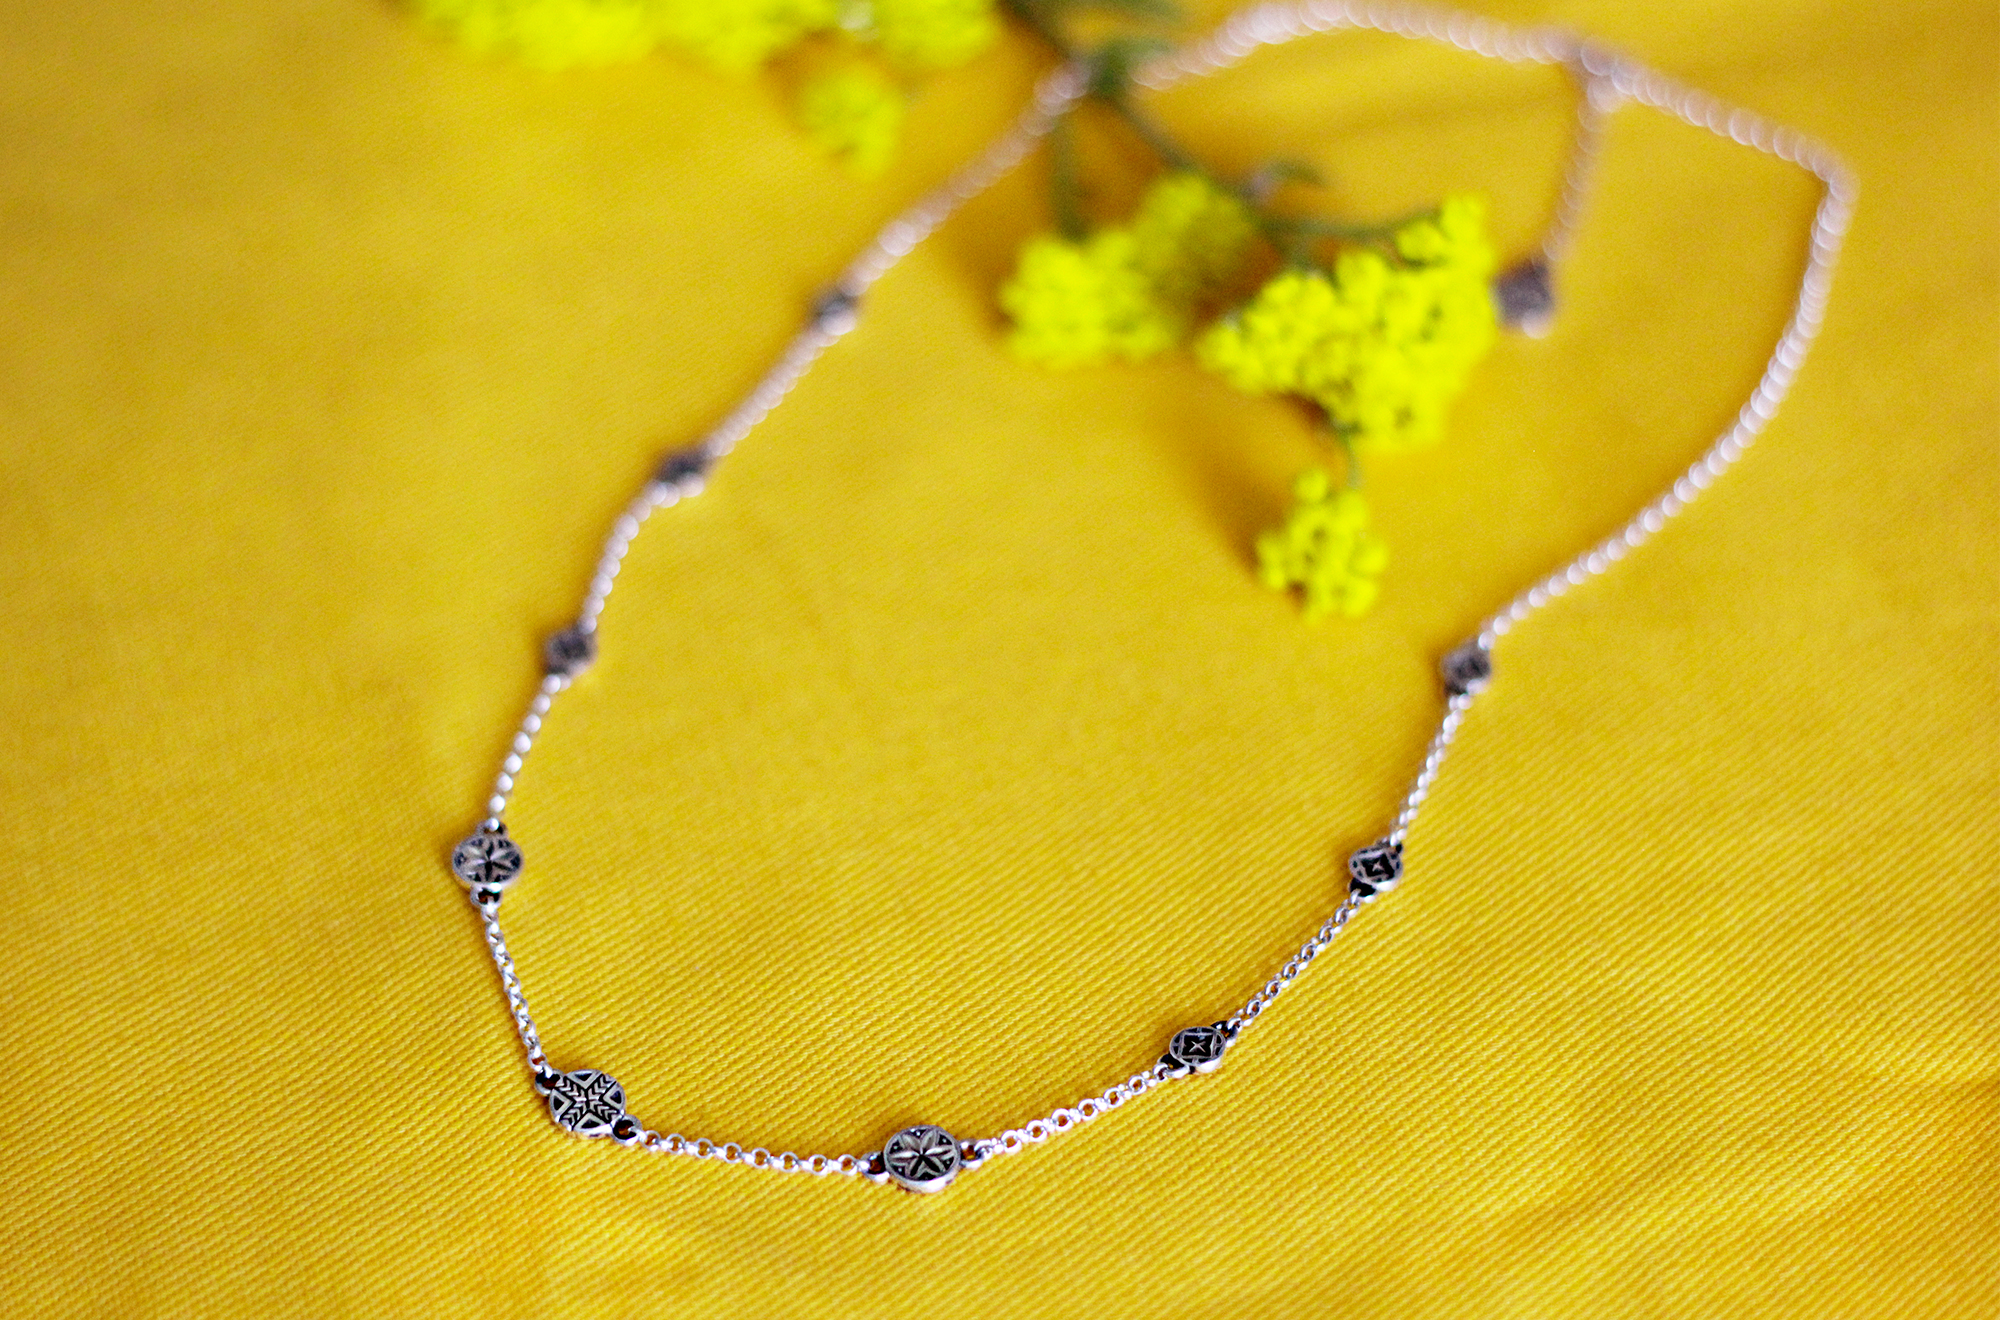 Necklace "Daghdghan" - Gatanaxsh